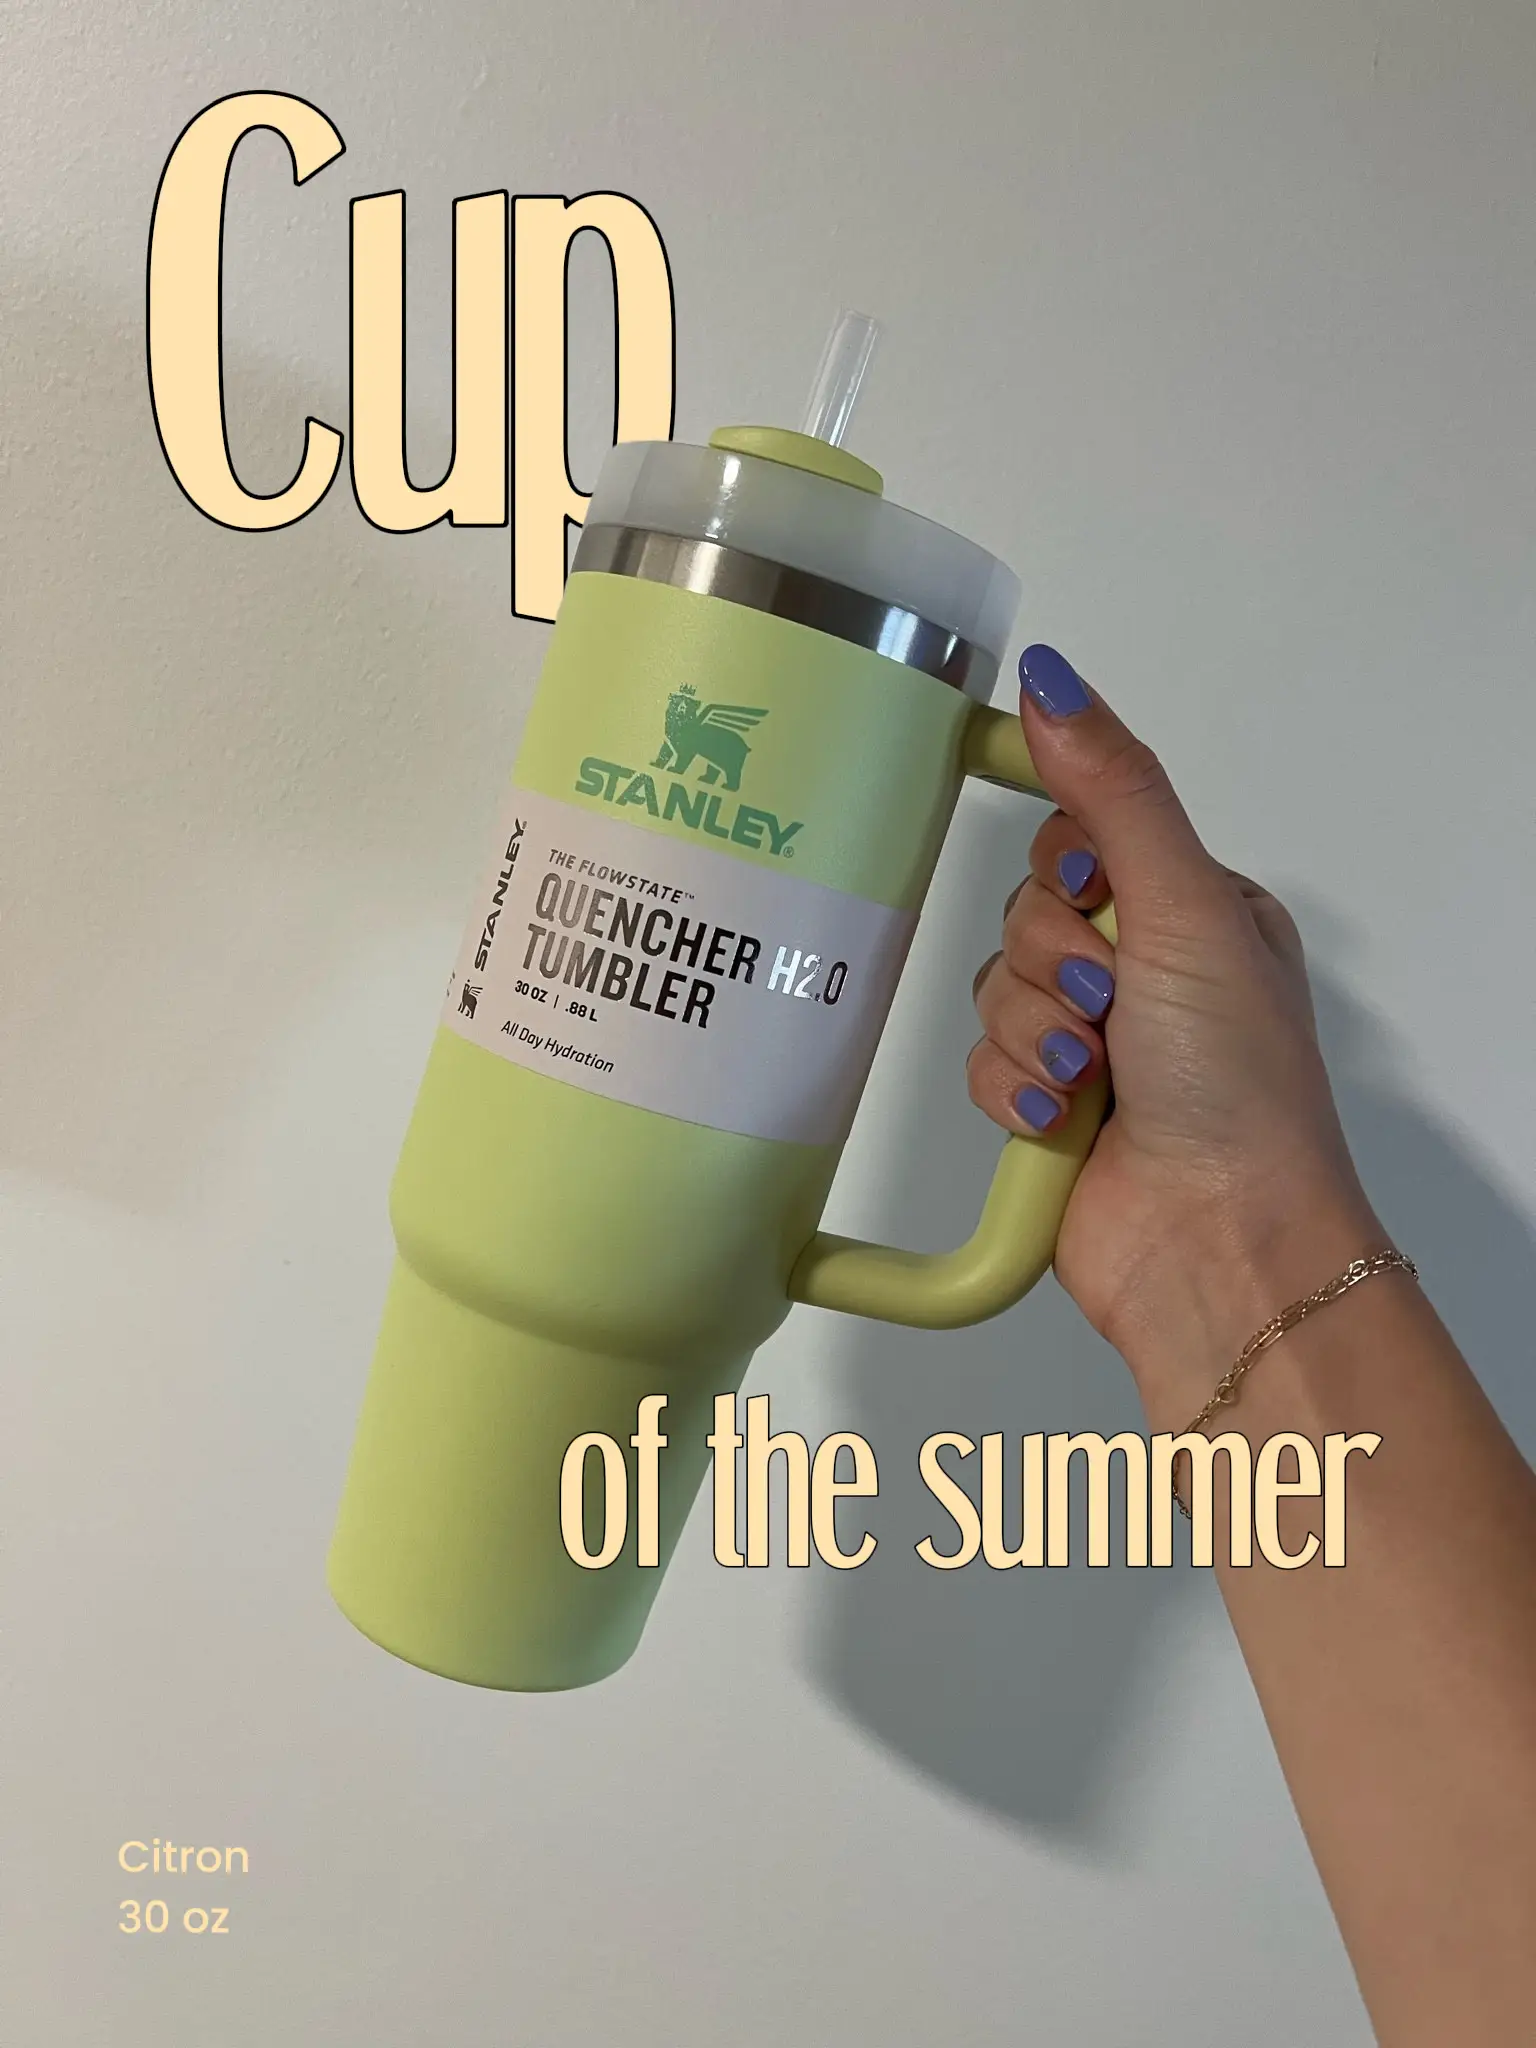 Stanley Cup Quencher H2.0 Tumbler 40oz Citron Target Exclusive In Hand 